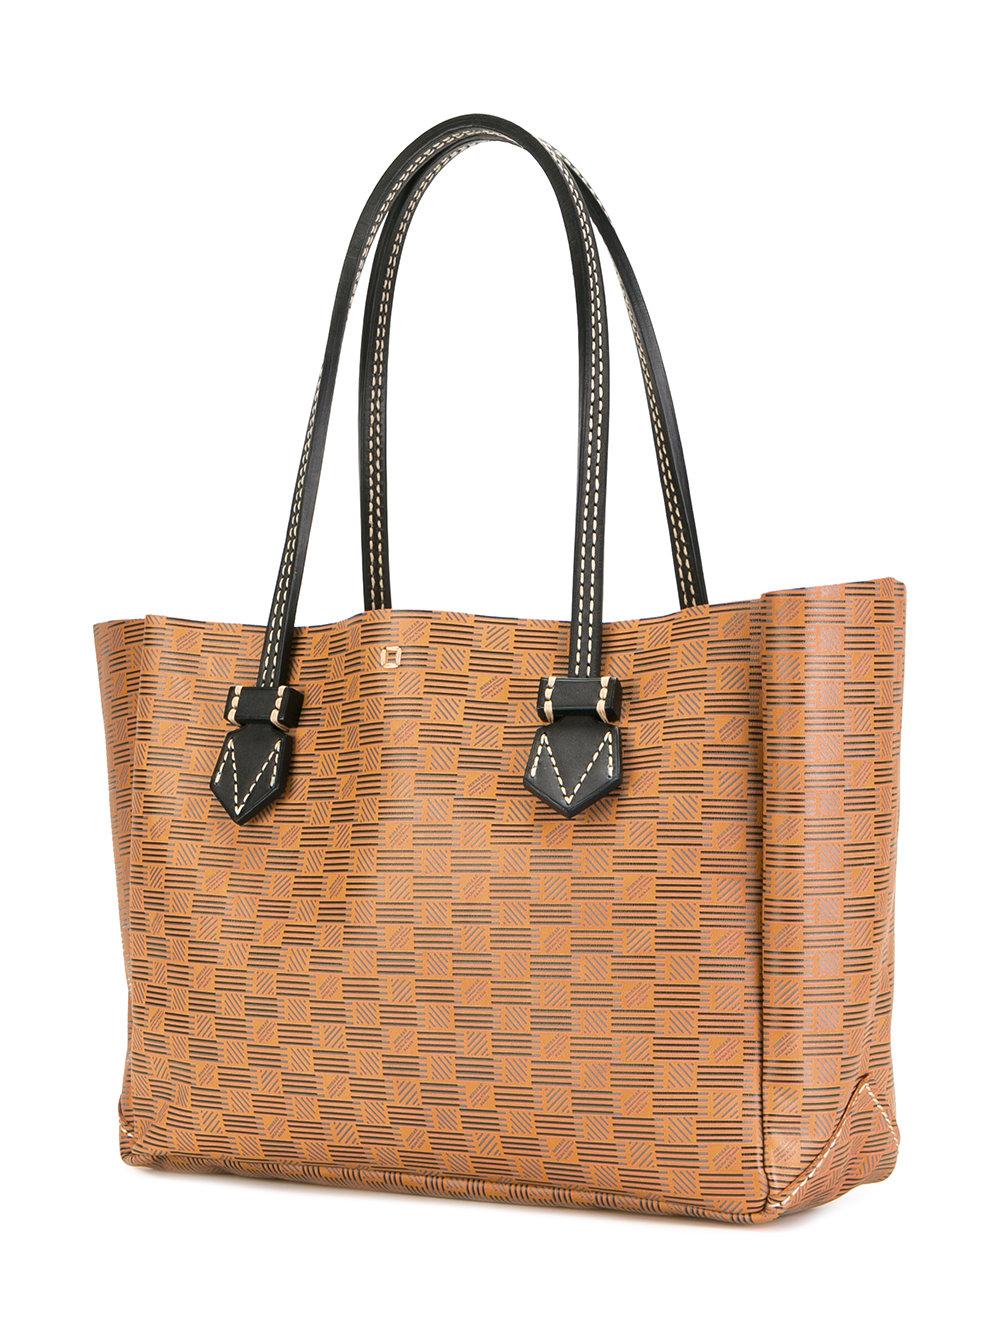 Moreau Leather 'vincennes' Tote Bag in Brown - Lyst